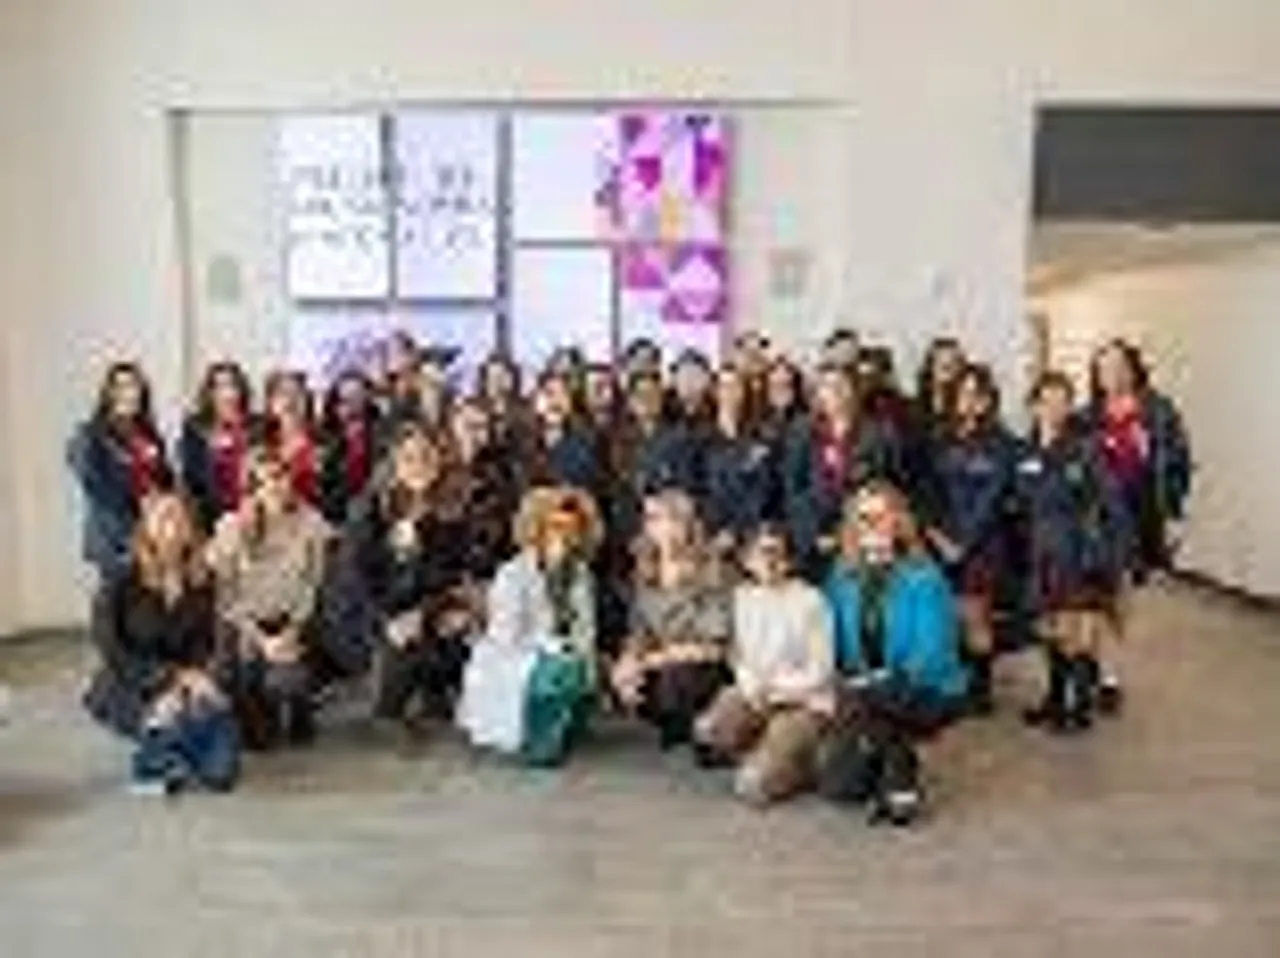 Mary Kay Inspires Next Generation of Female STEAM Leaders at Youth Summit